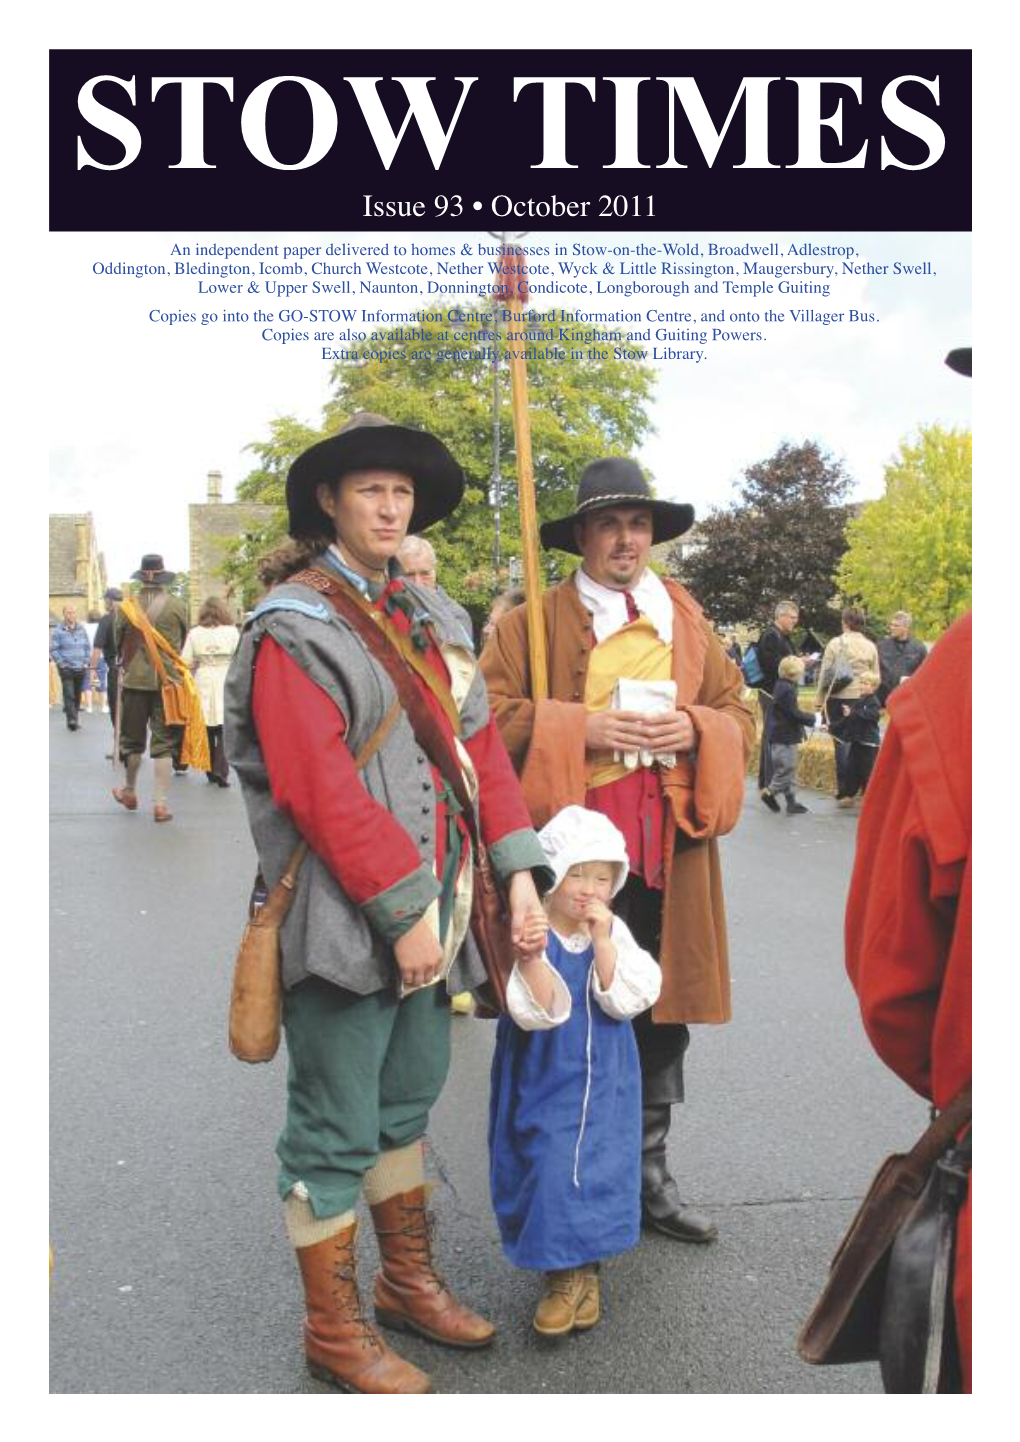 Stow Times Issue 93 • October 2011